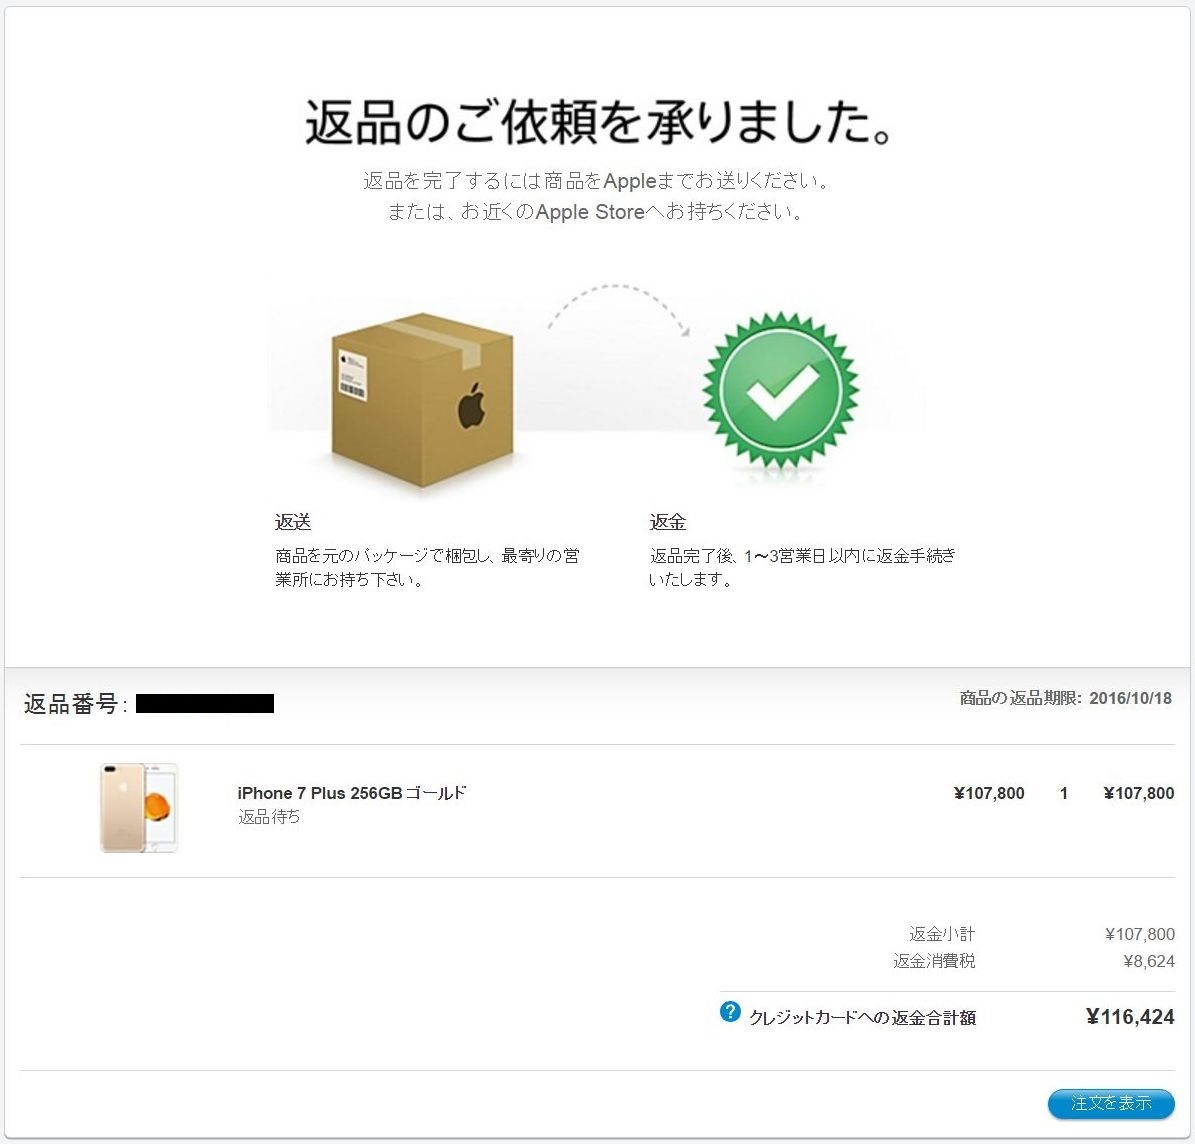 Apple Online Storeで購入したiPhoneの返品